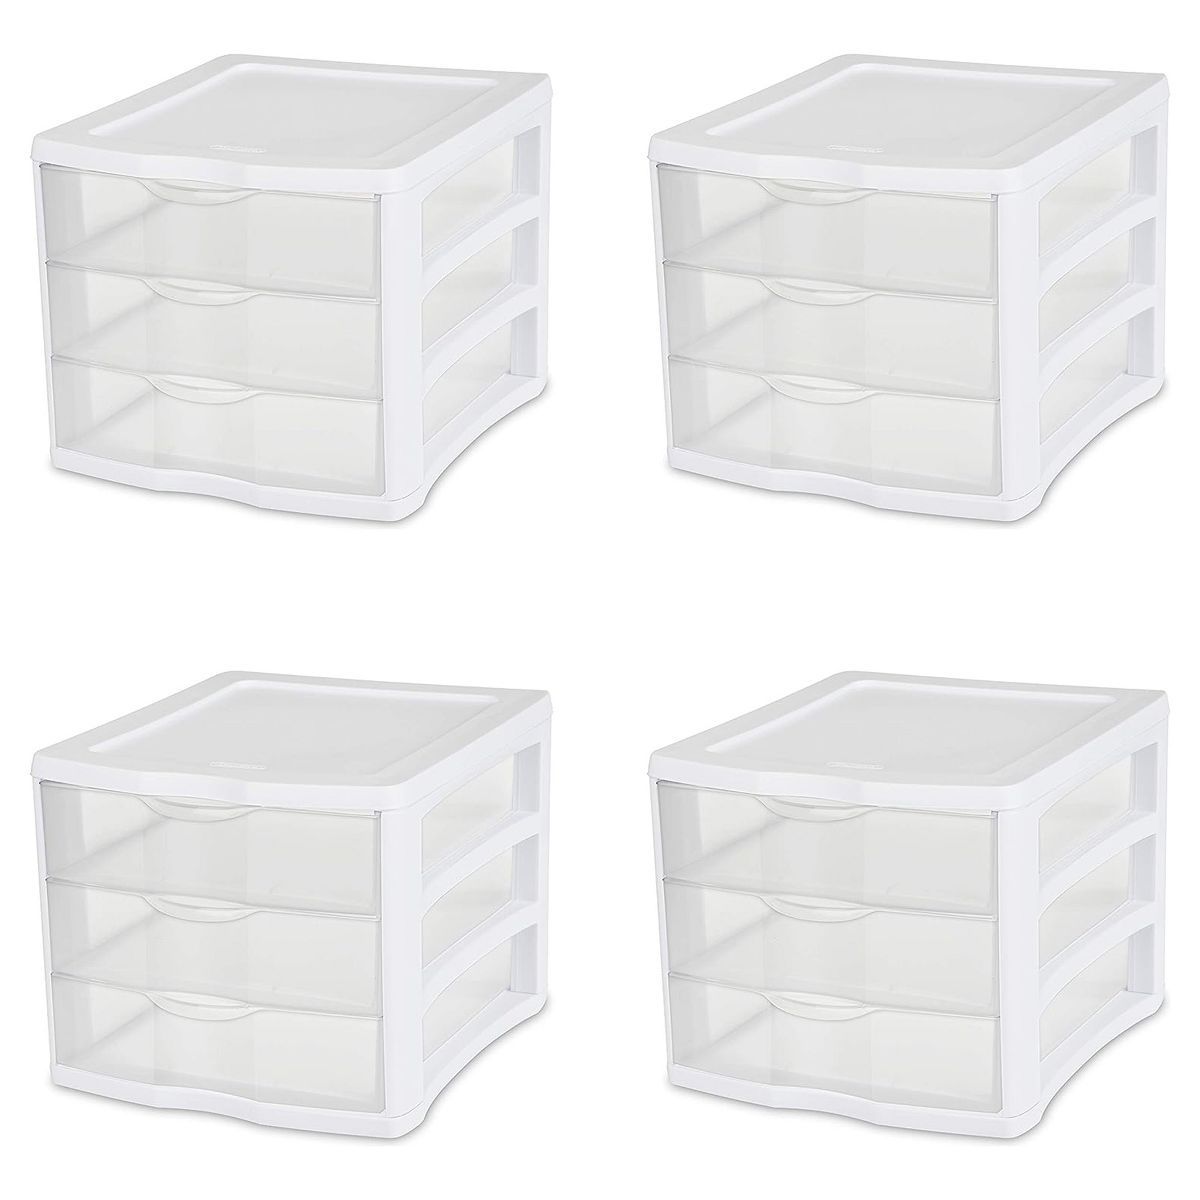 Sterilite ClearView Compact Stacking 3 Drawer Storage Organizer System for Crafting Supplies, Hom... | Target